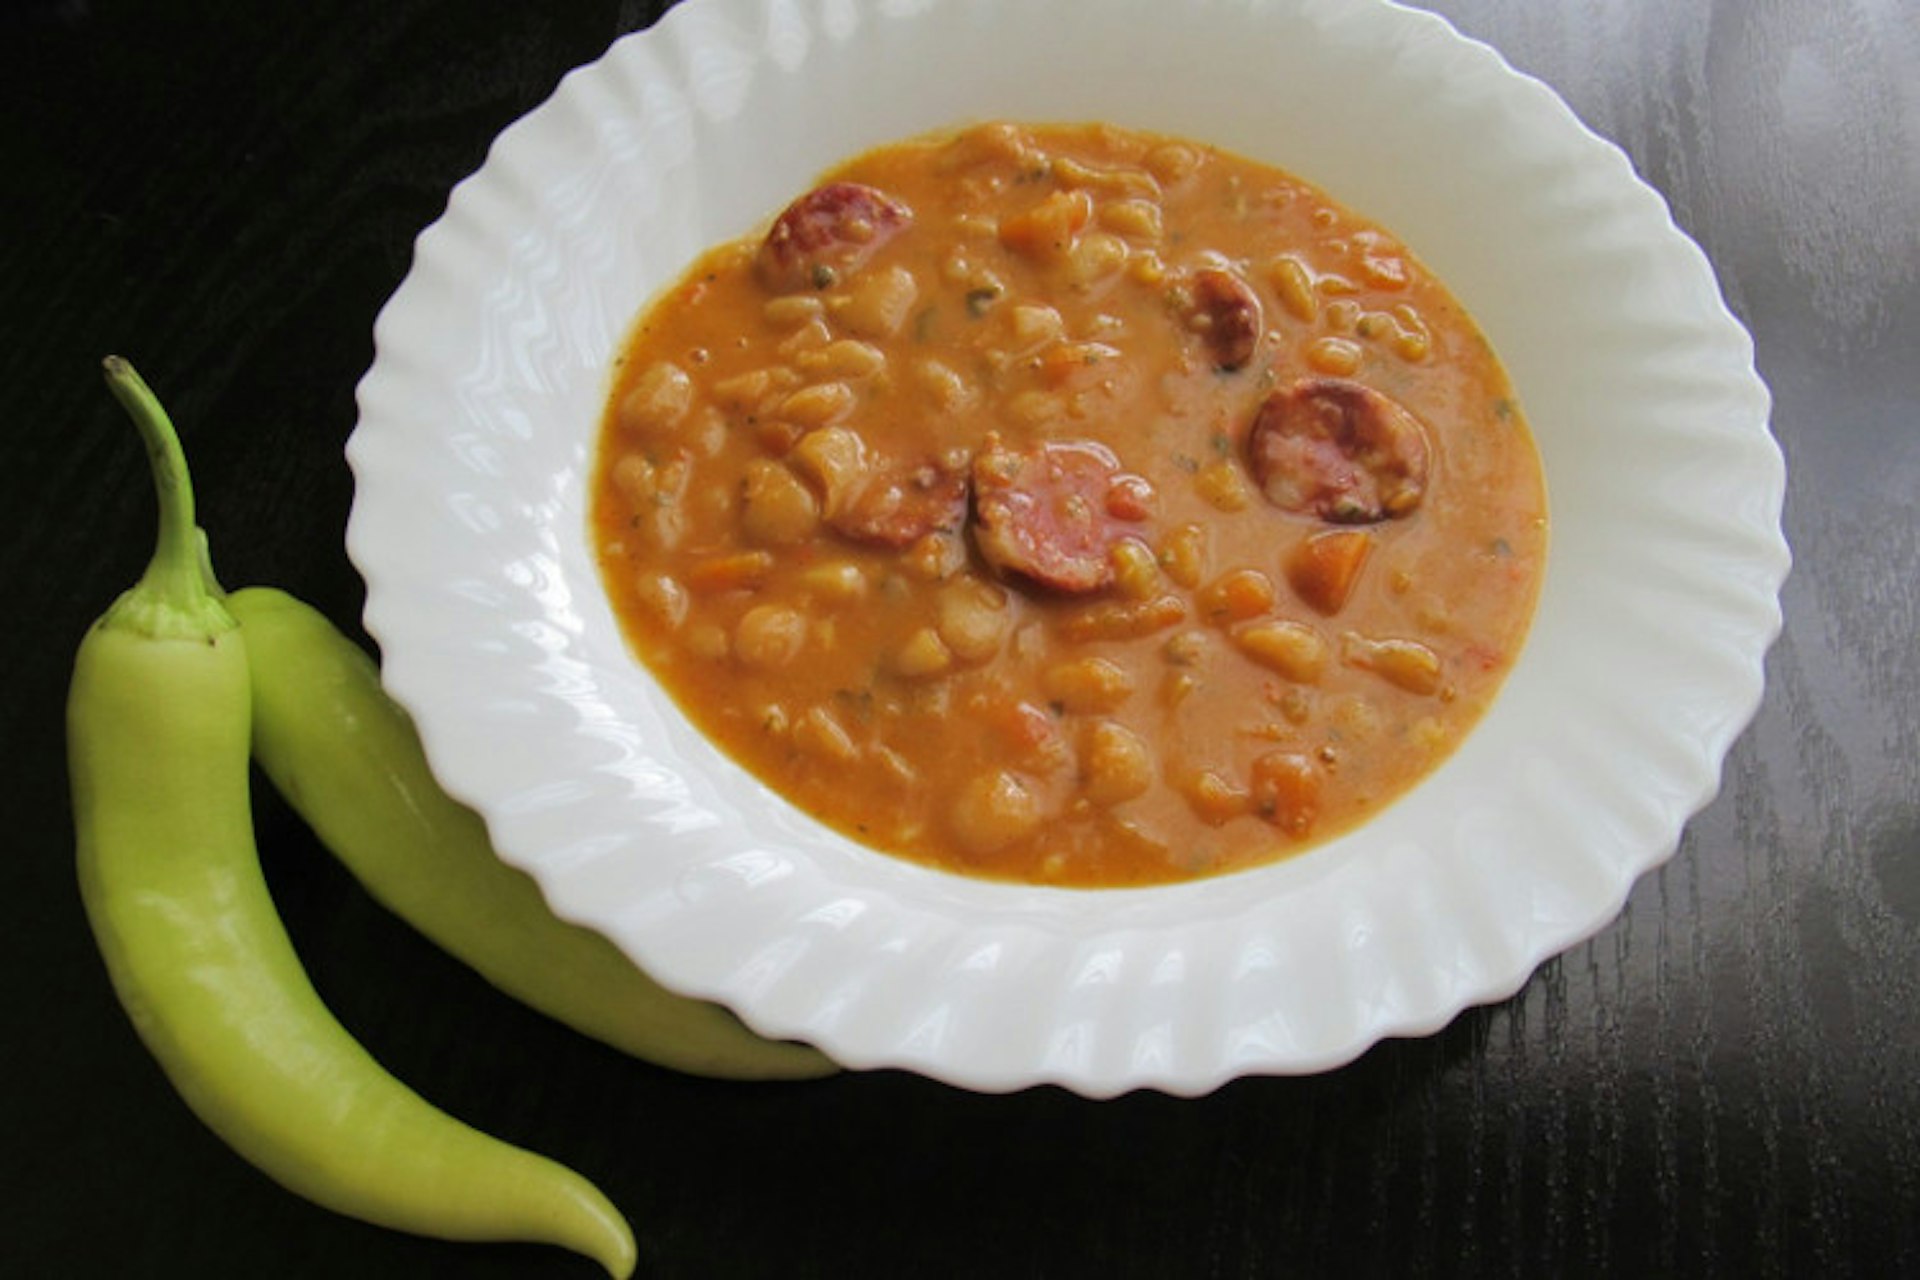 Traditional dish of pasulj (white beans) with sausages. Image by Ivana Sokolović / CC BY 2.0